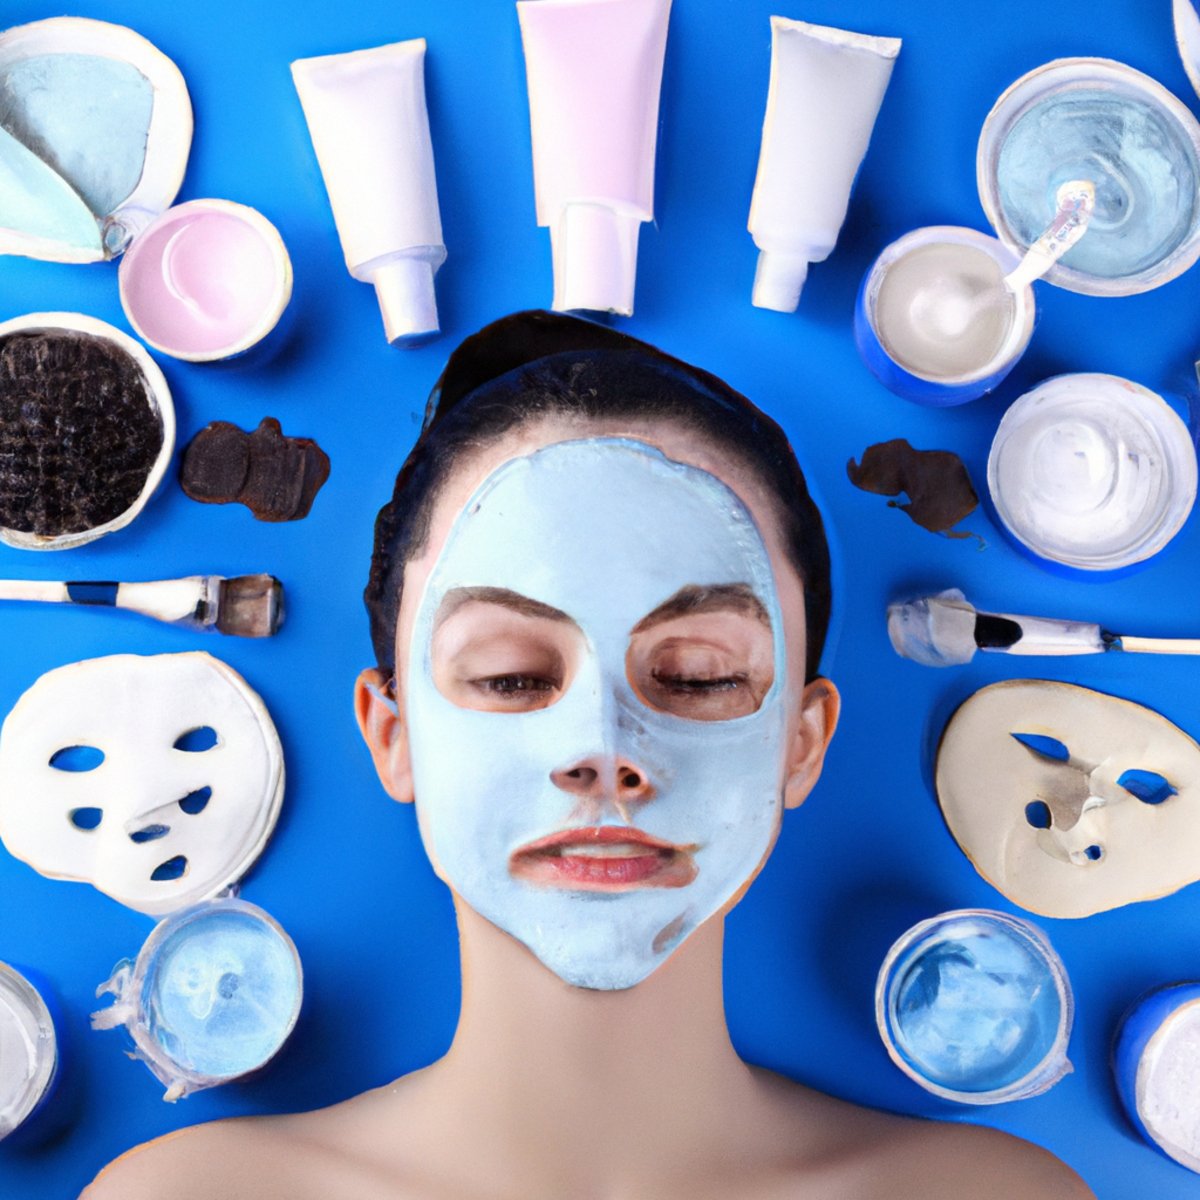 Vibrant assortment of face masks and skincare tools on clean surface, showcasing multi-masking technique.